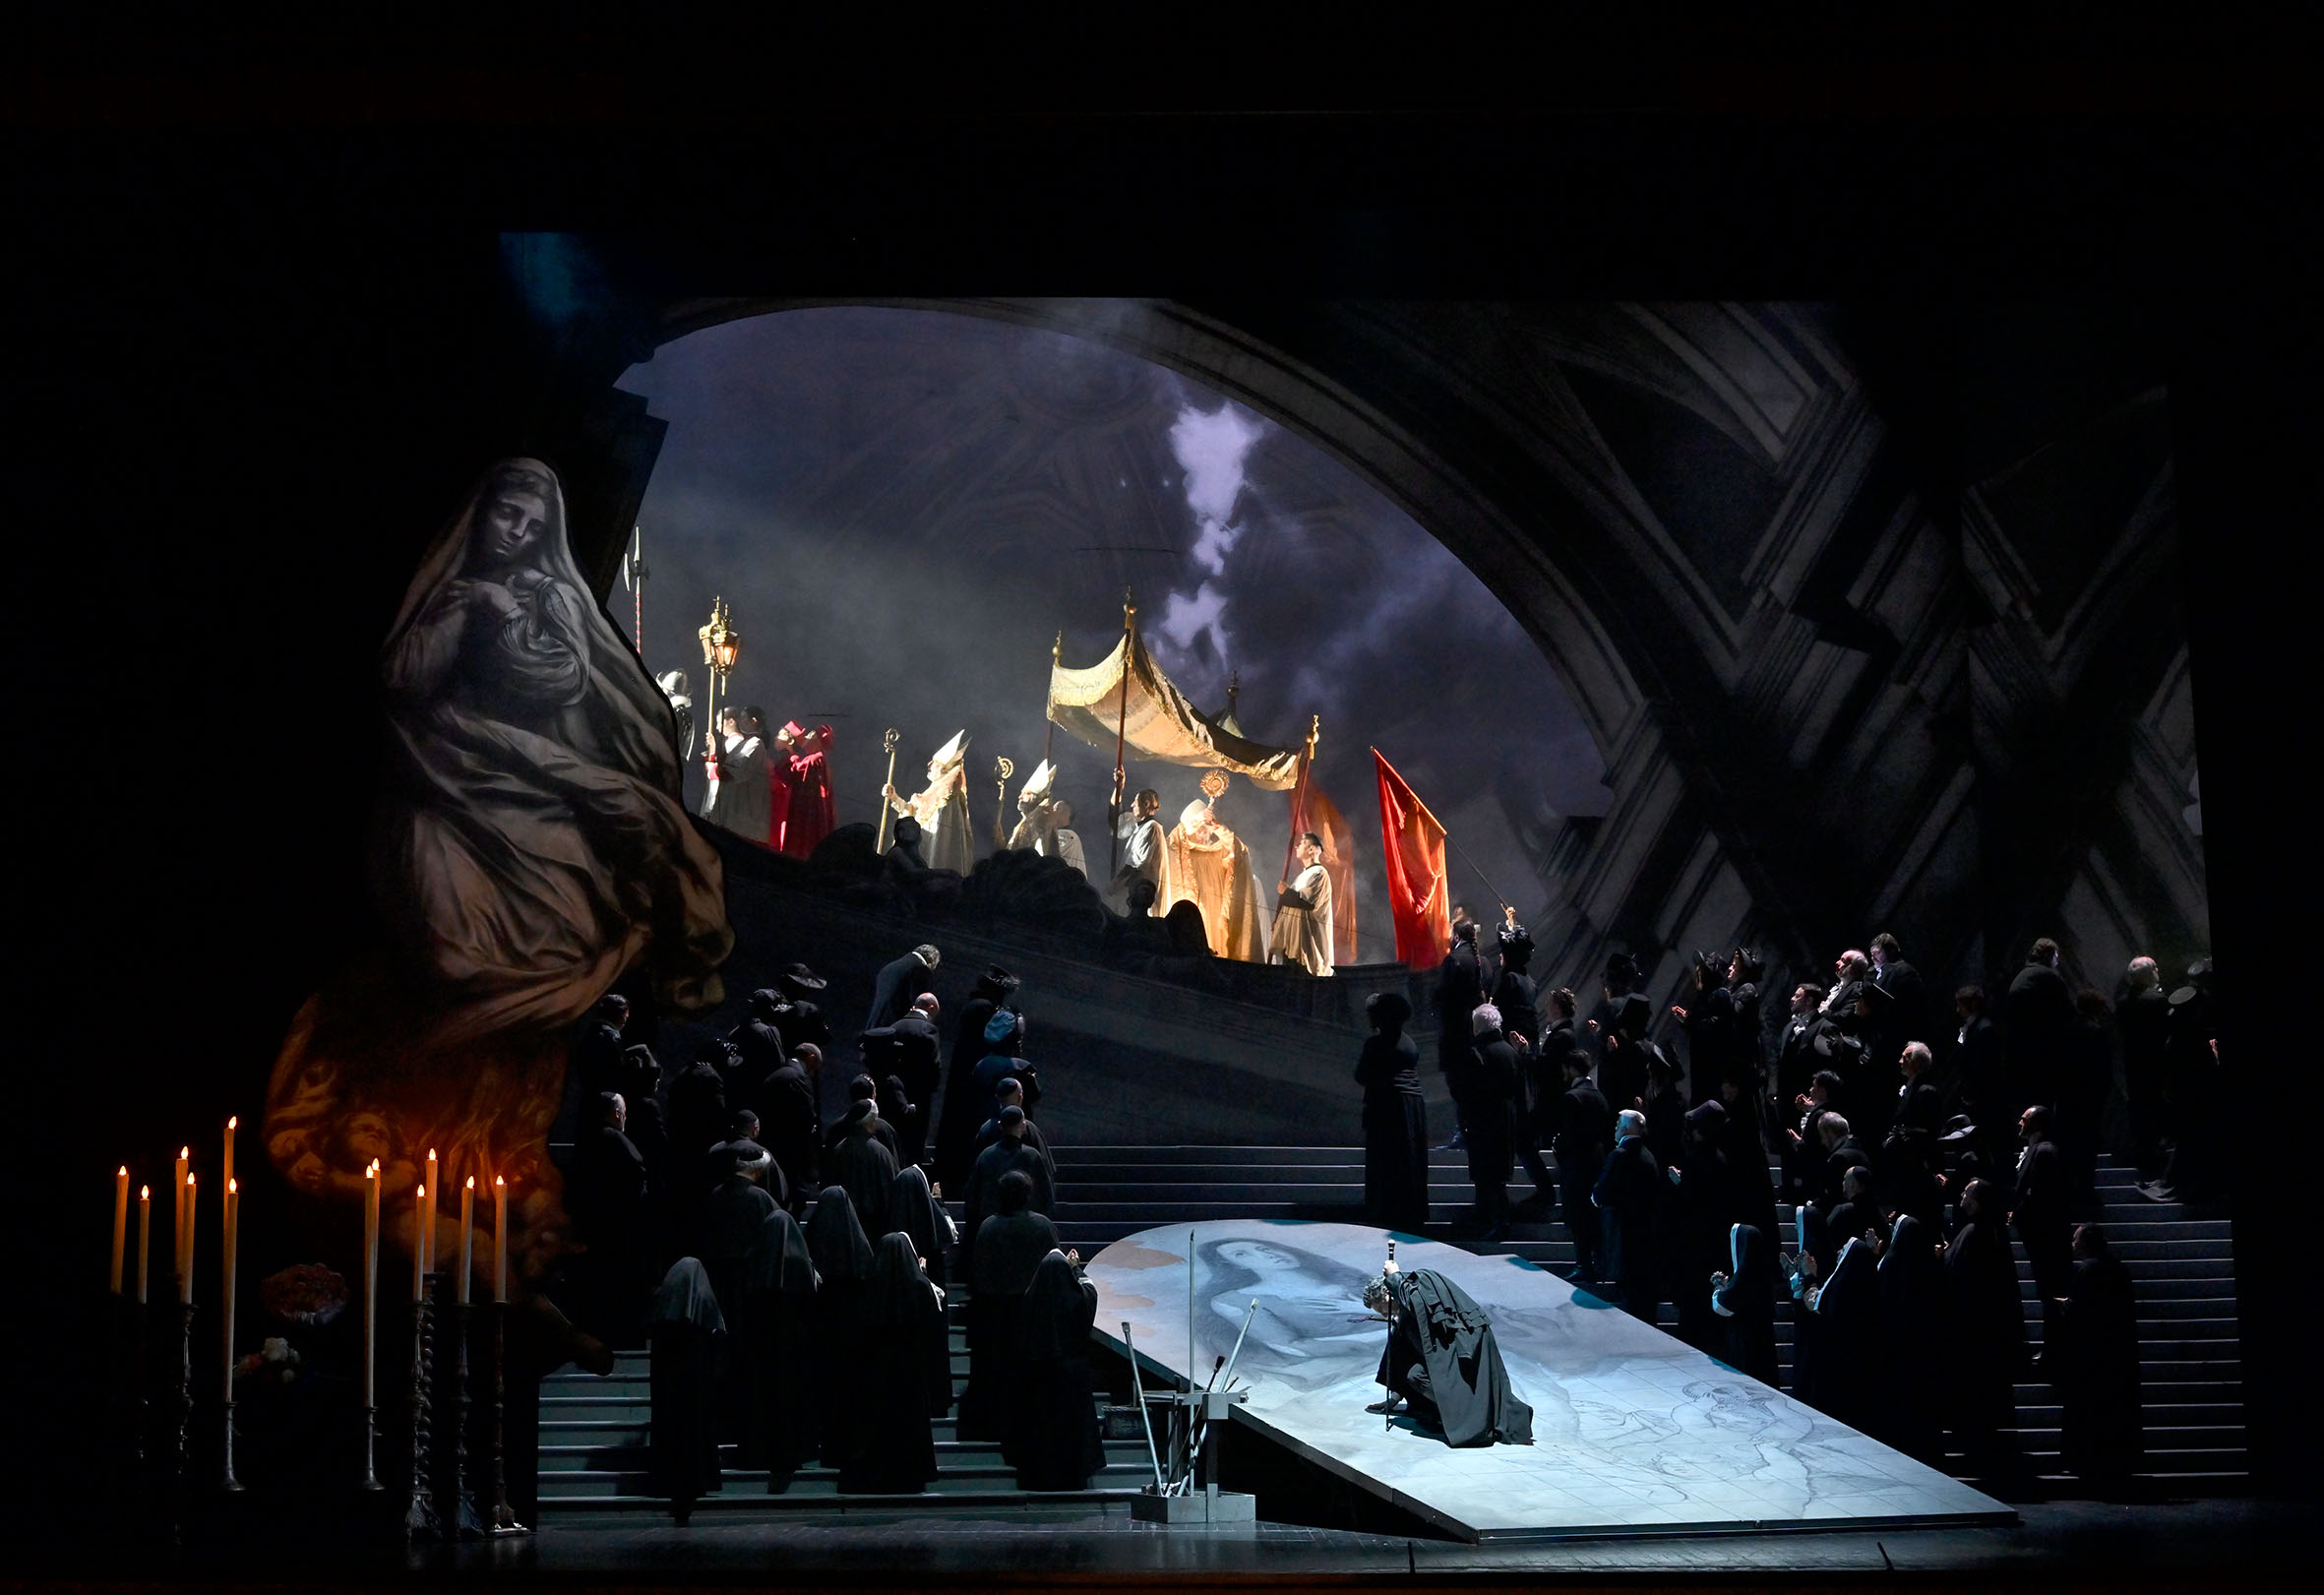 Puccini’s “Tosca” from Teatro Regio di Parma streamed on Operavision on May 31